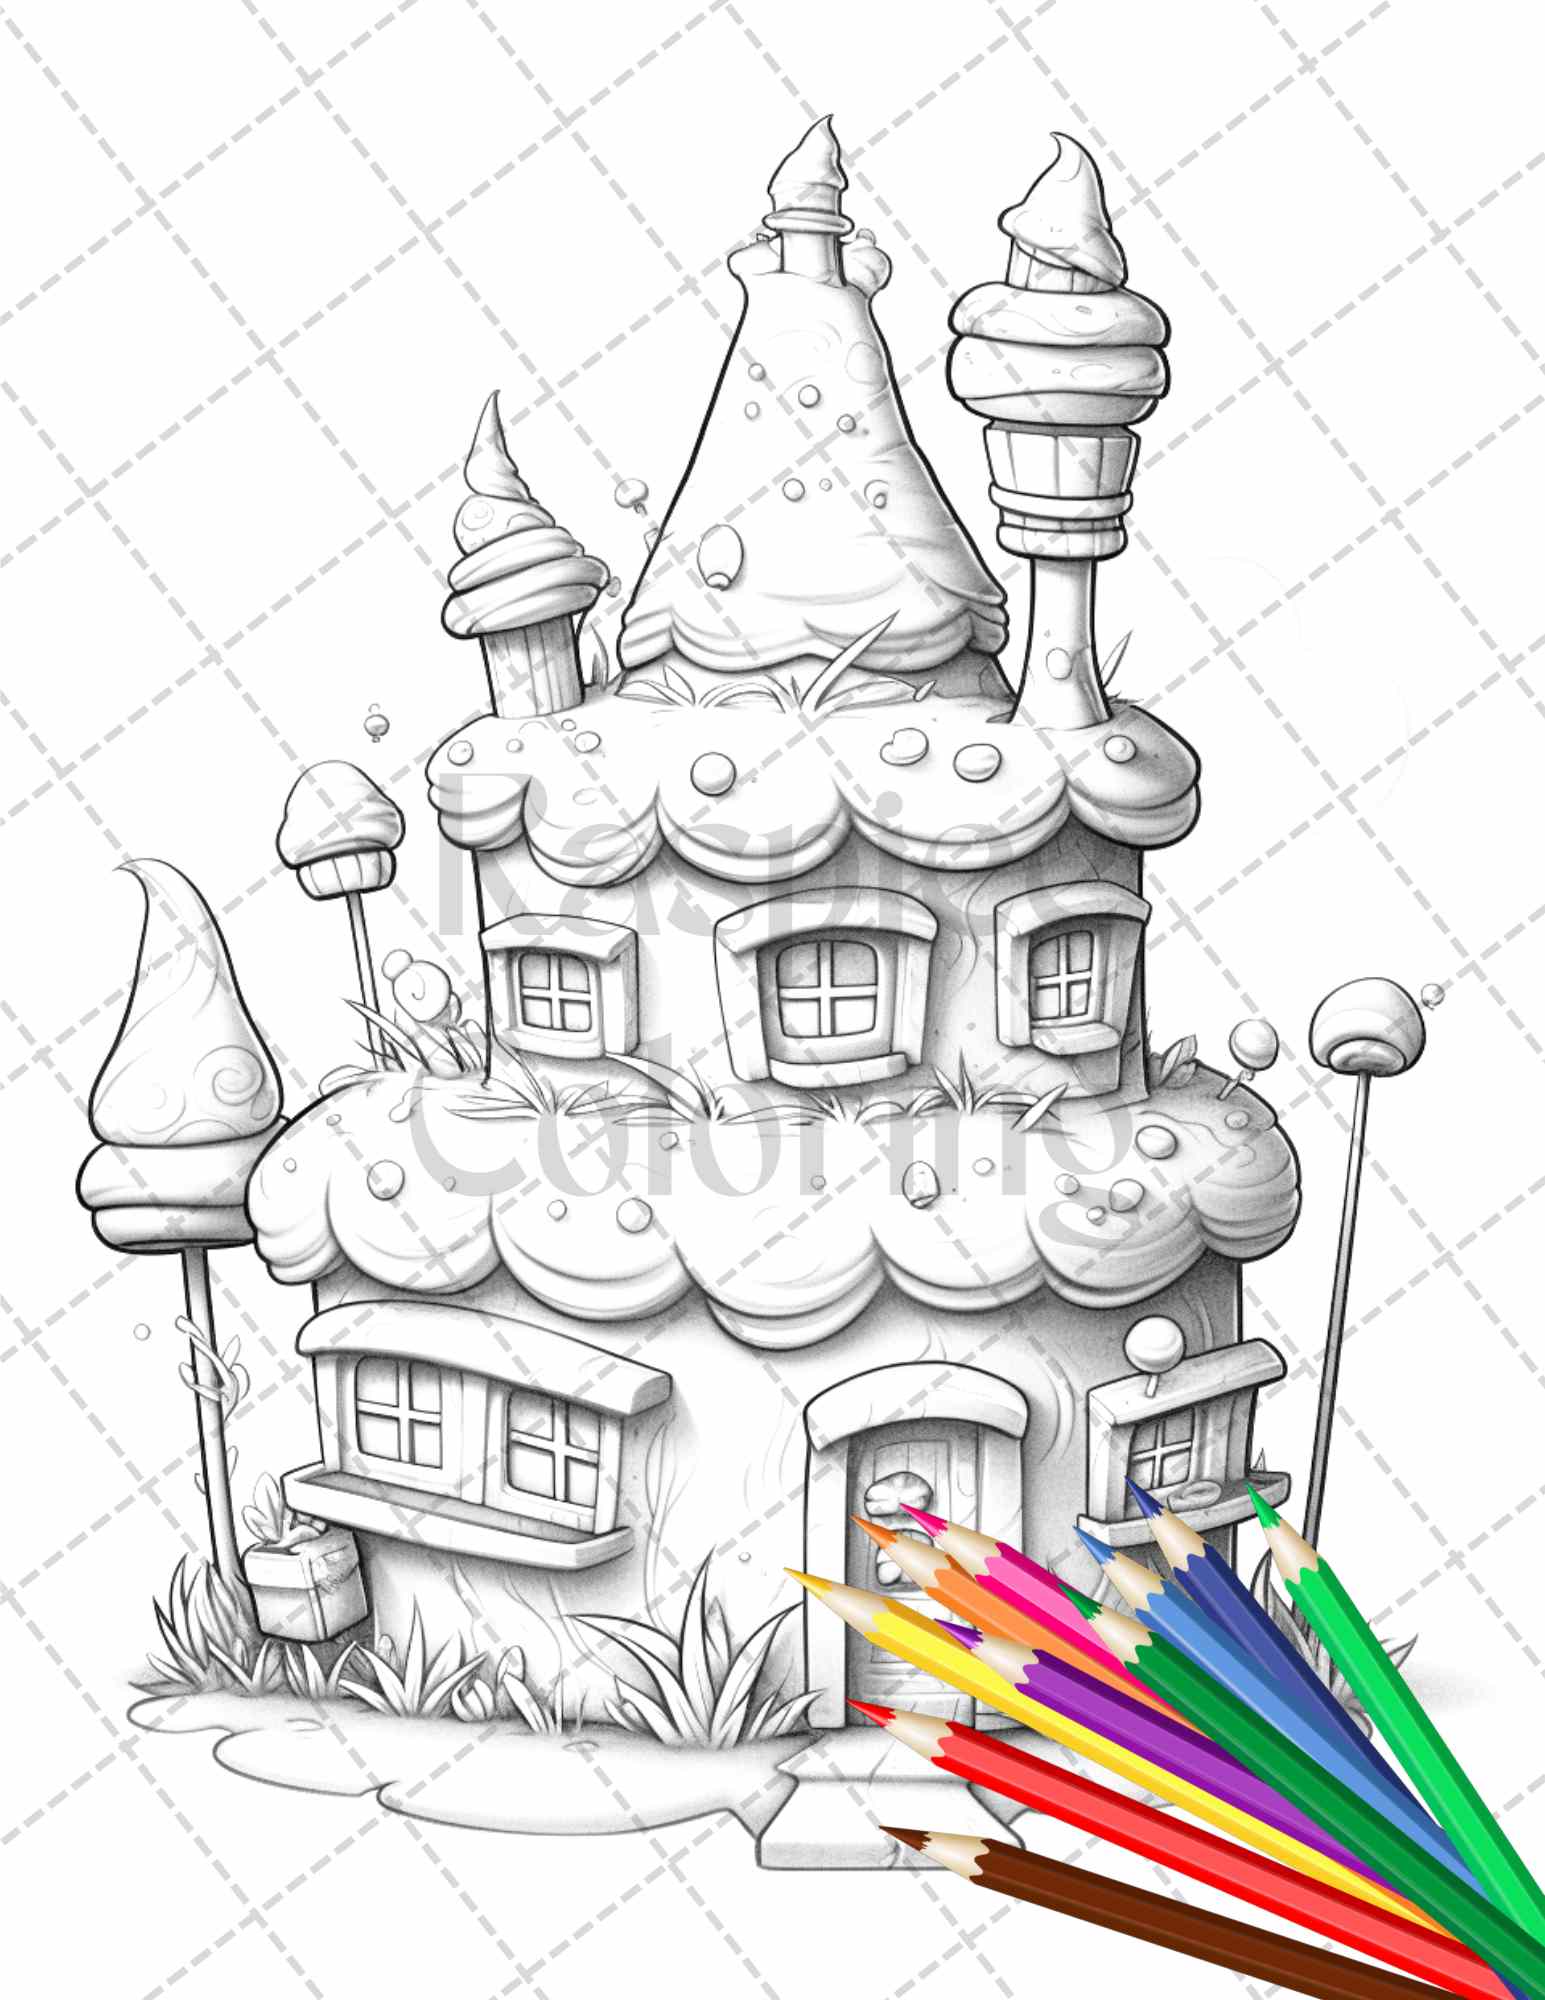 8 Adult and kids coloring book page | CosKrisArt